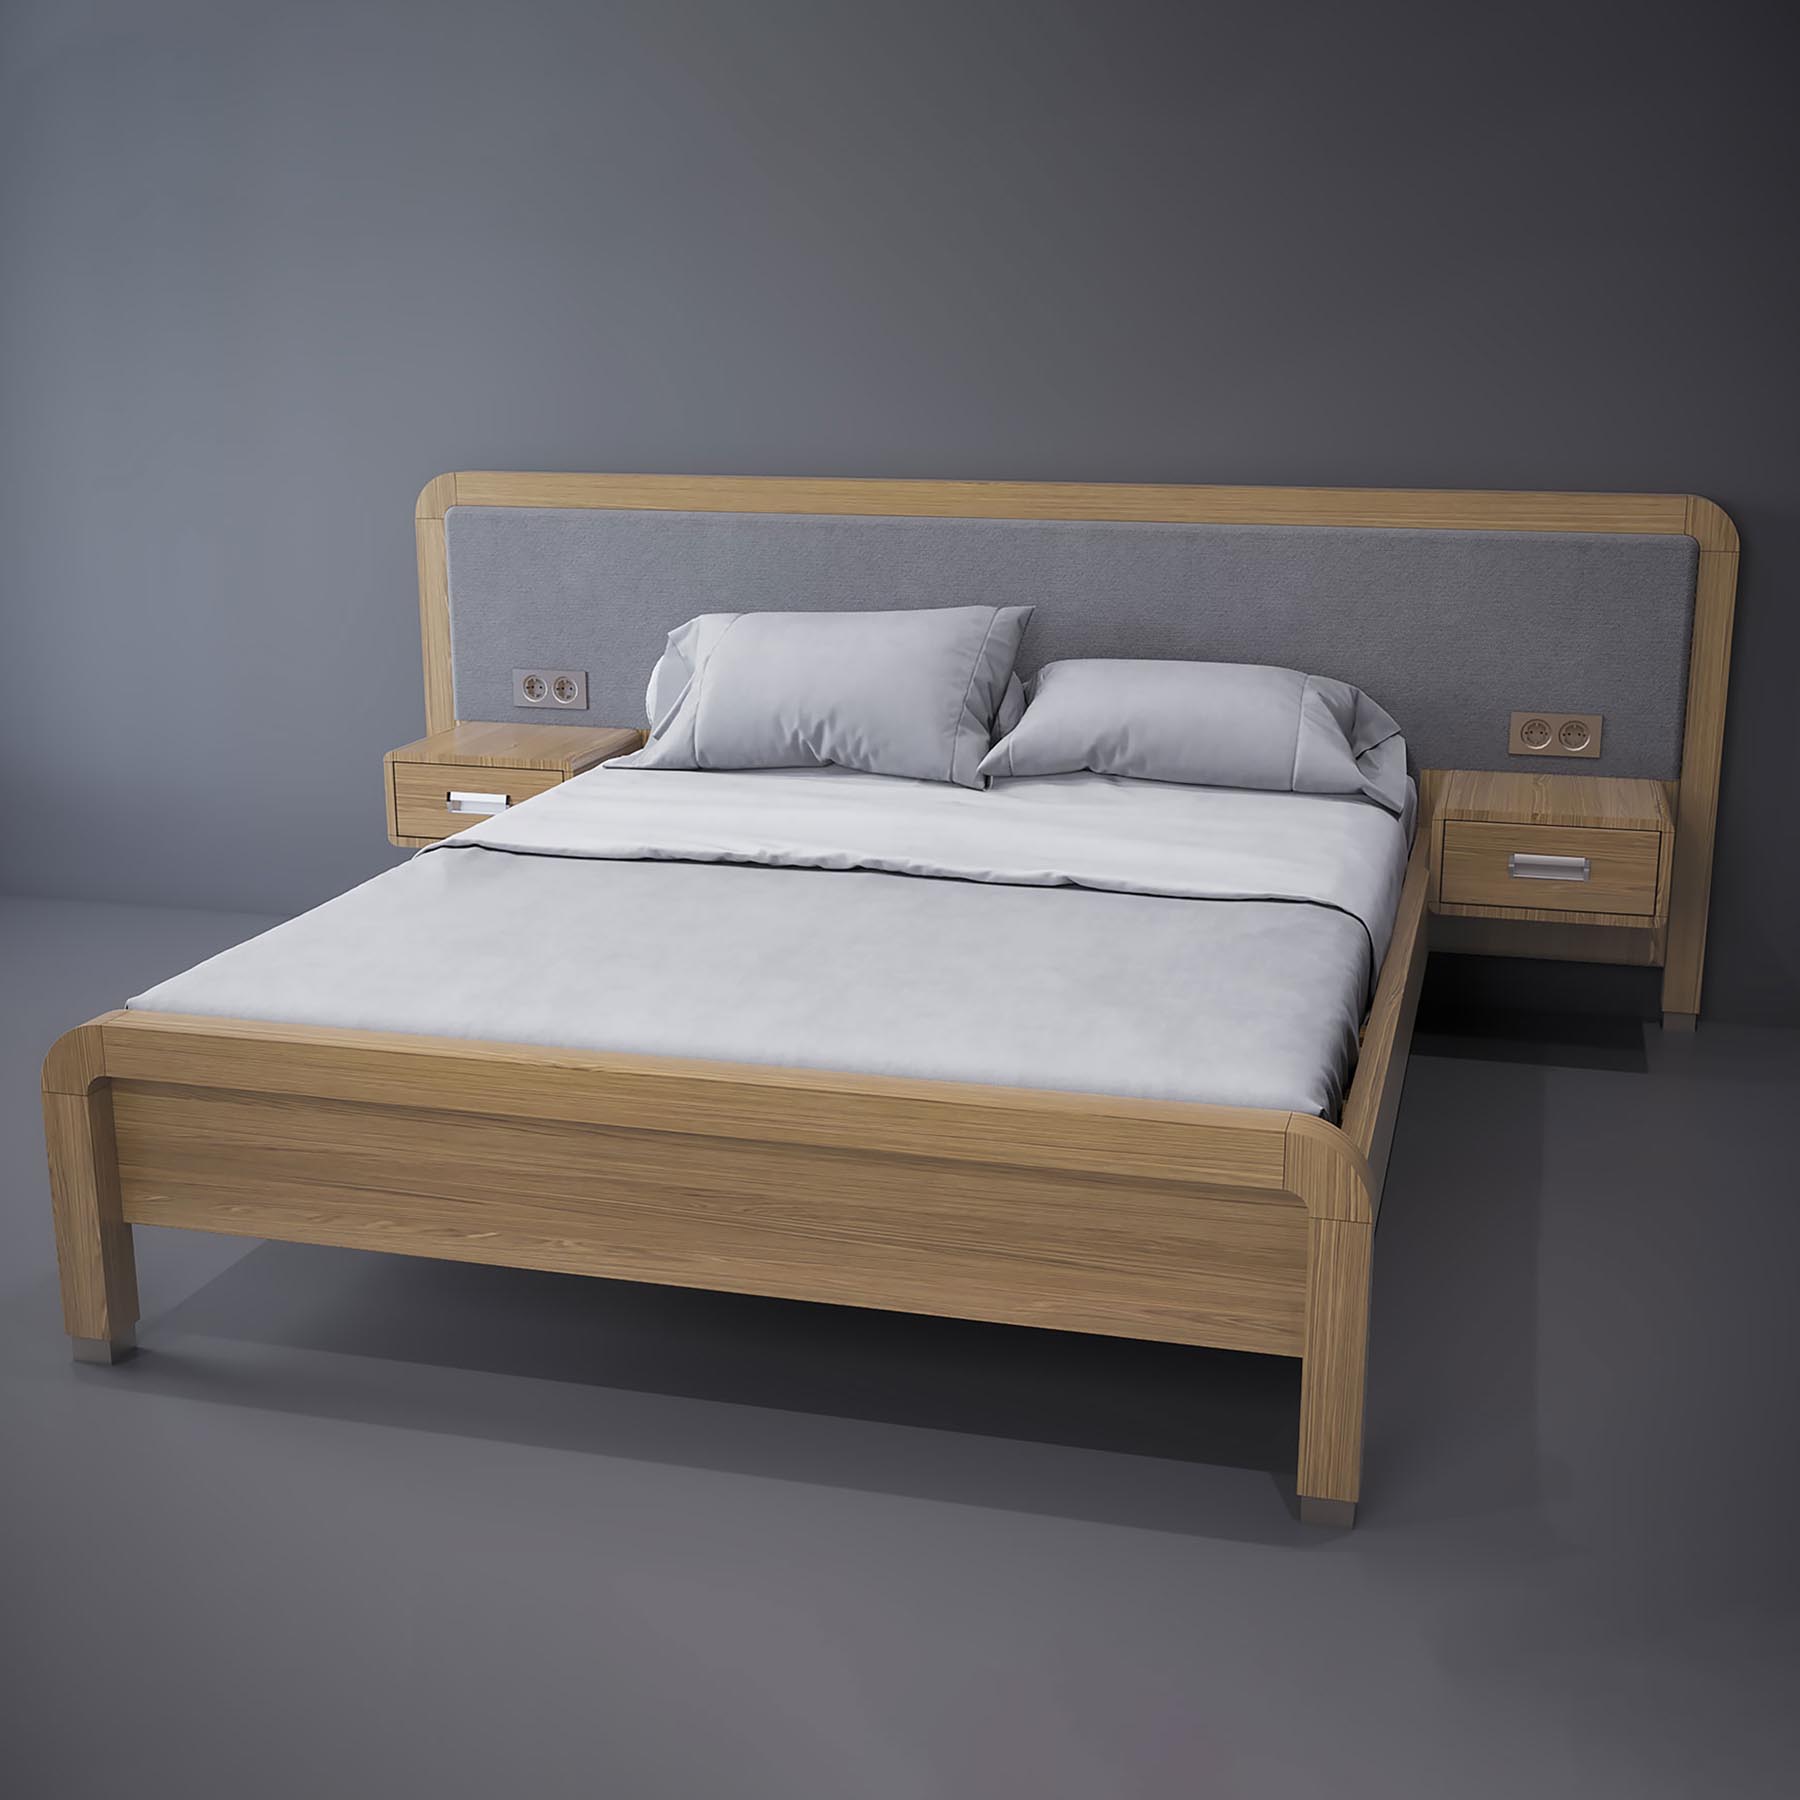 Double bed with hanging cabinets from the Warsaw collection 2